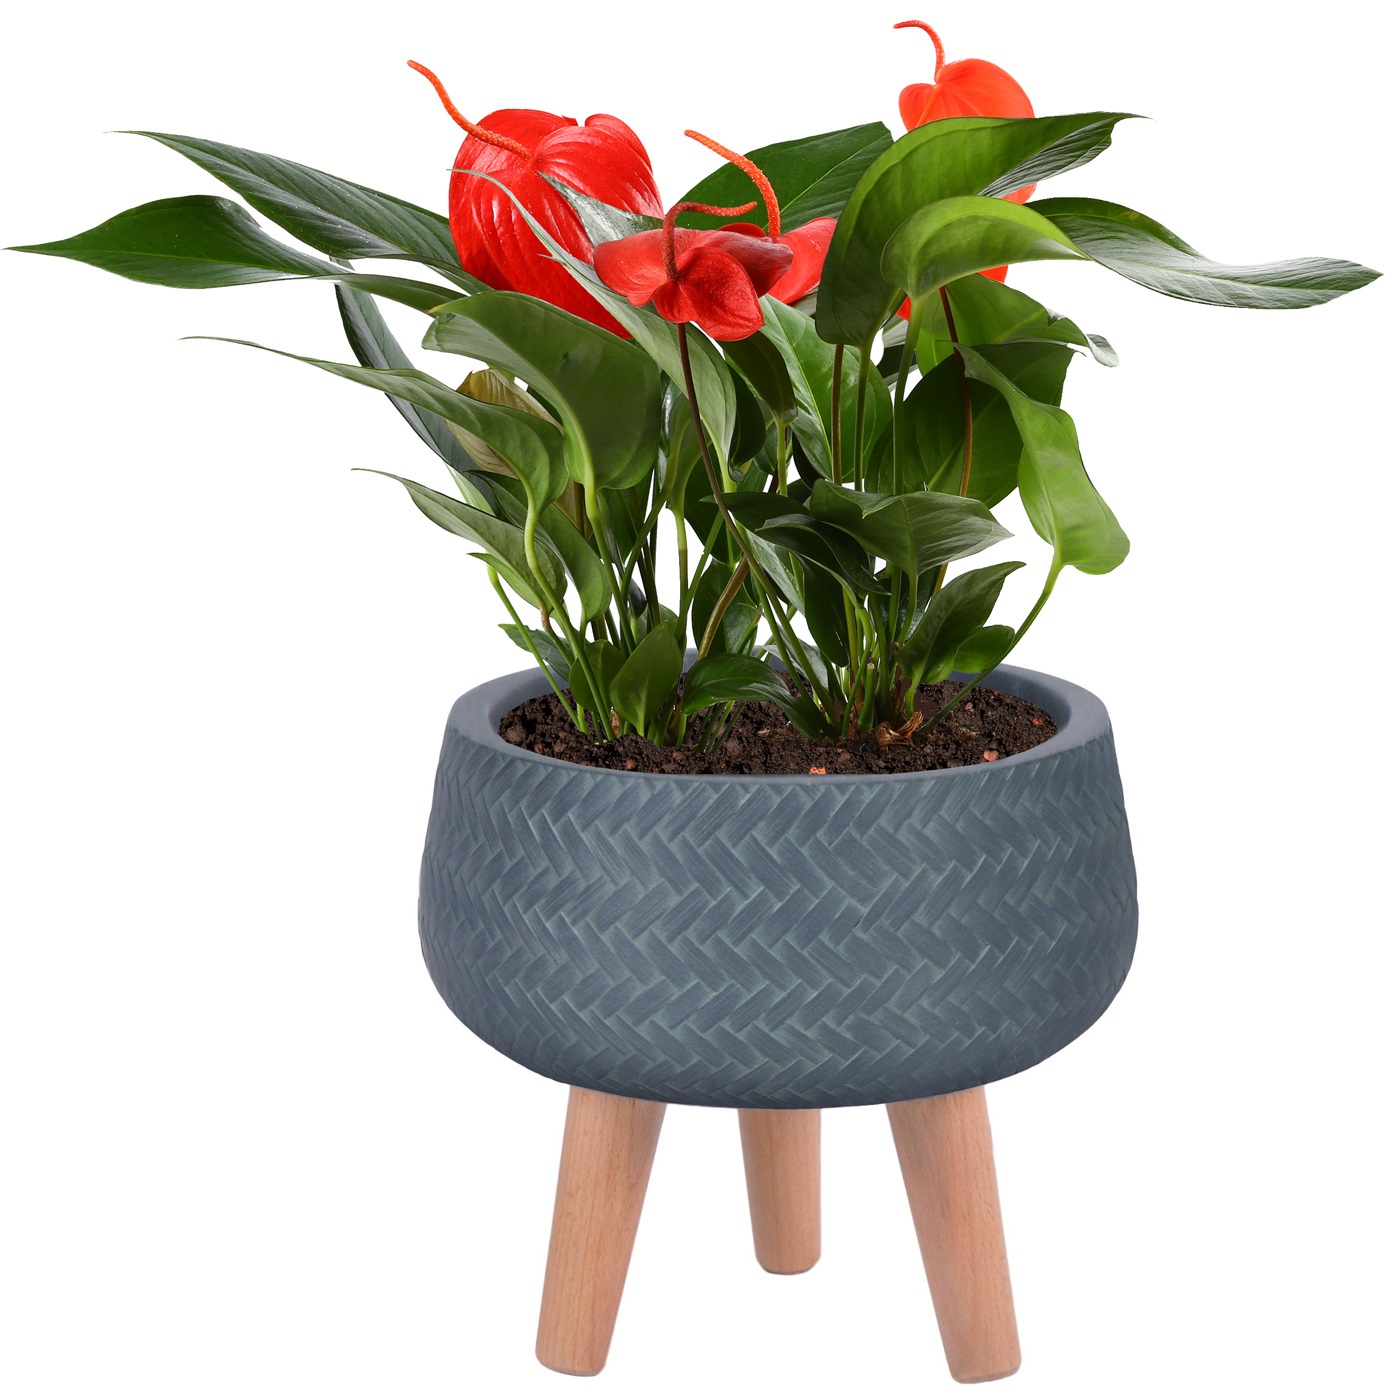 Plaited Style Slate Grey Bowl Indoor Planter with Legs D24 H23 cm, 4.2 ltrs Cap.